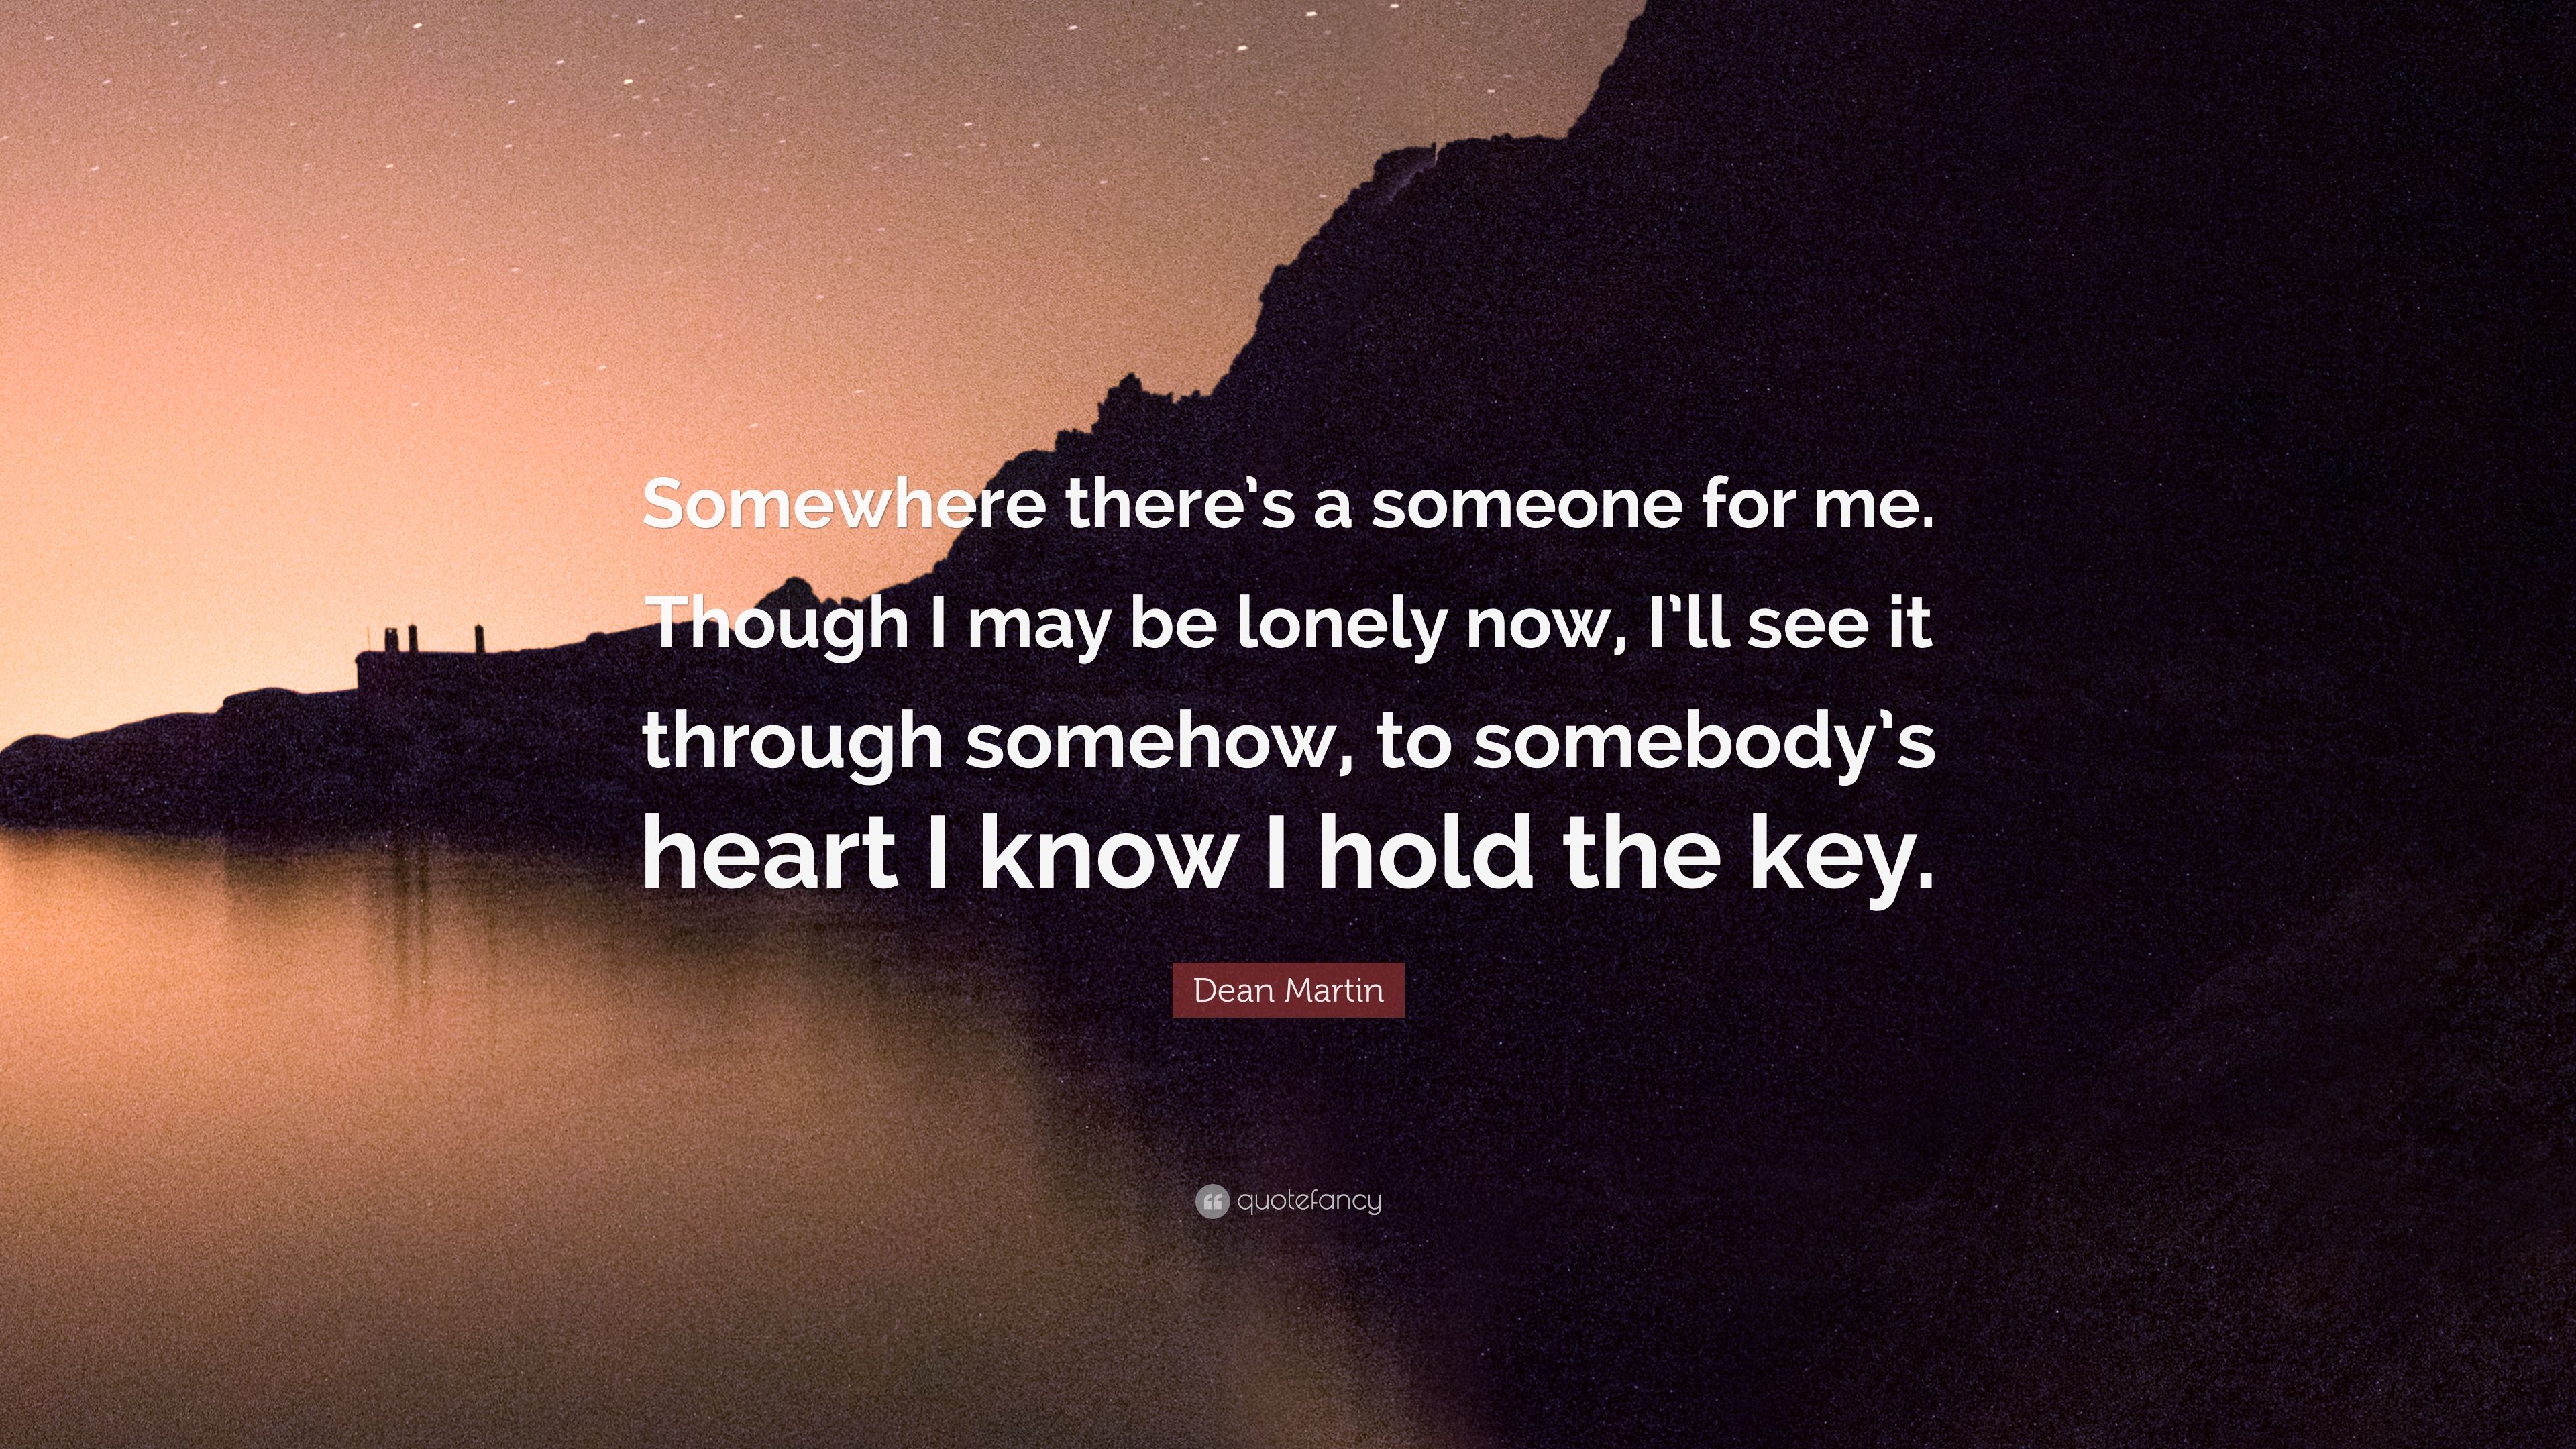 Dean Martin Quote: “Somewhere there's a someone for me. Though I may